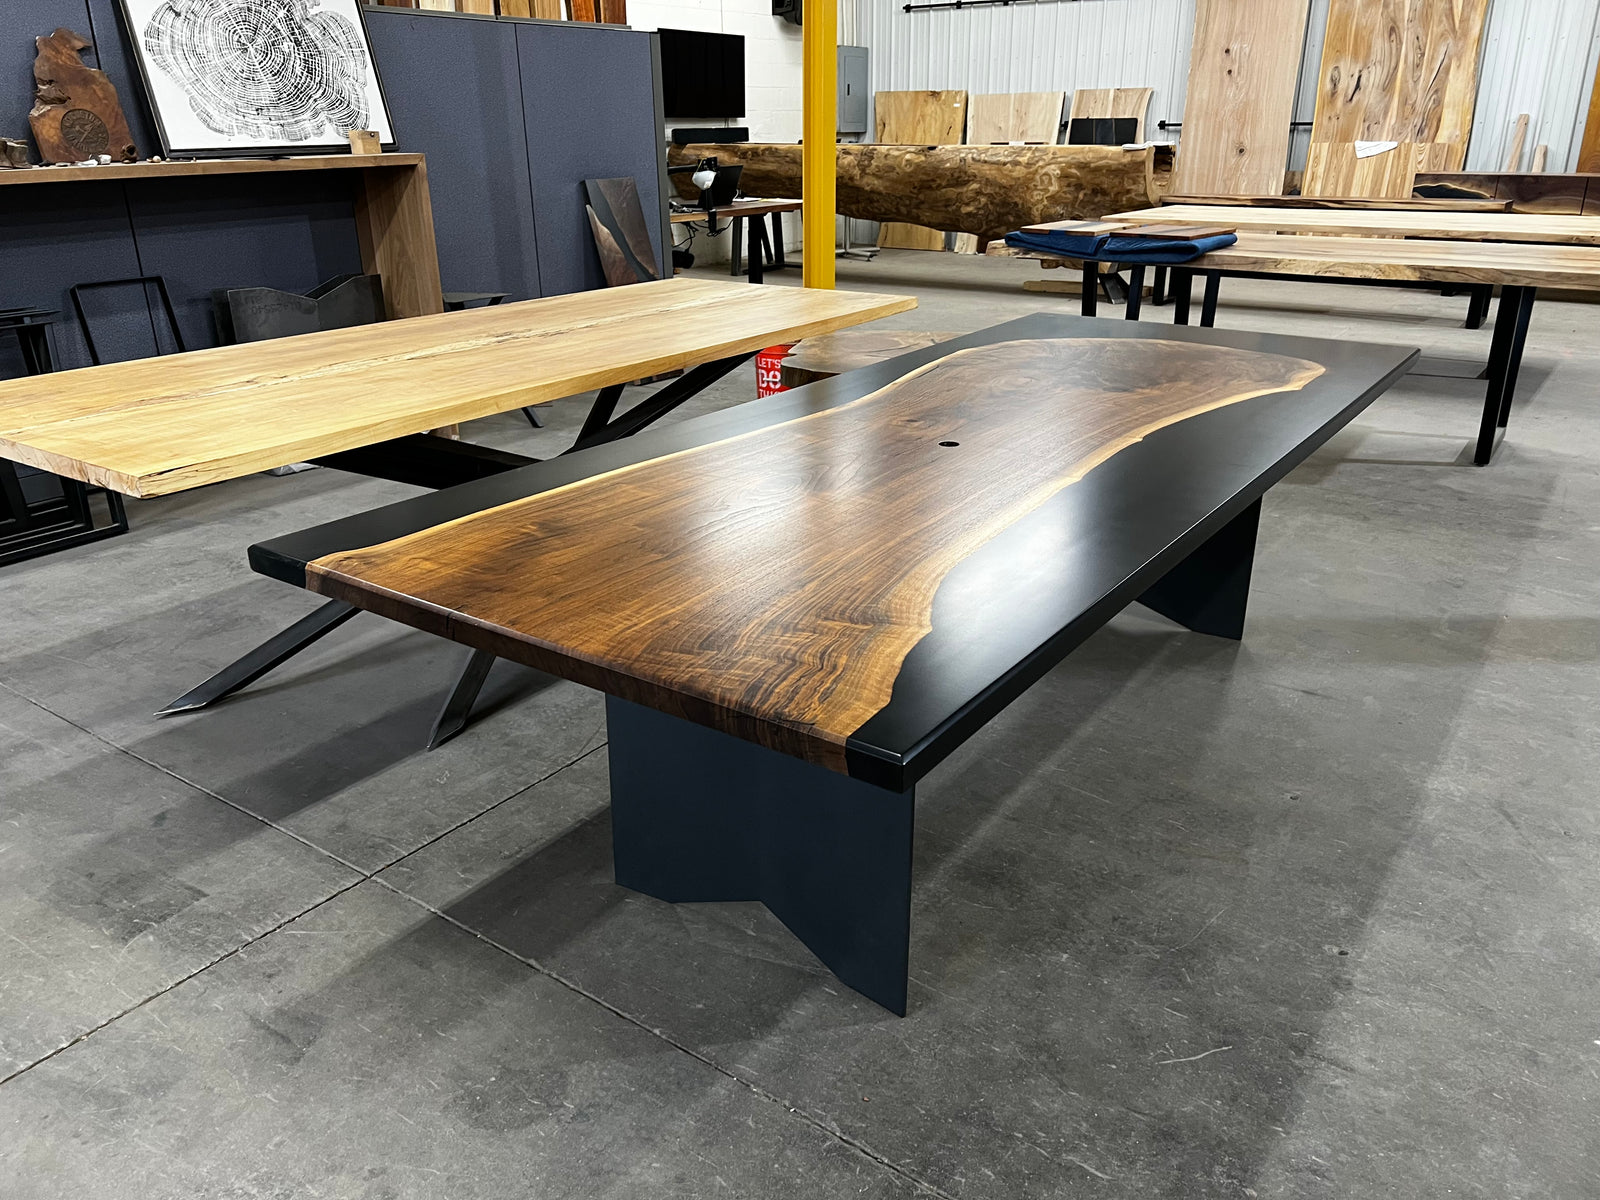 Custom Colors Dark Walnut Blue Green Epoxy Table live Edge-river Table  Dining Table Coffee Table-kitchen Table-resin Table %100 HANDMADE 